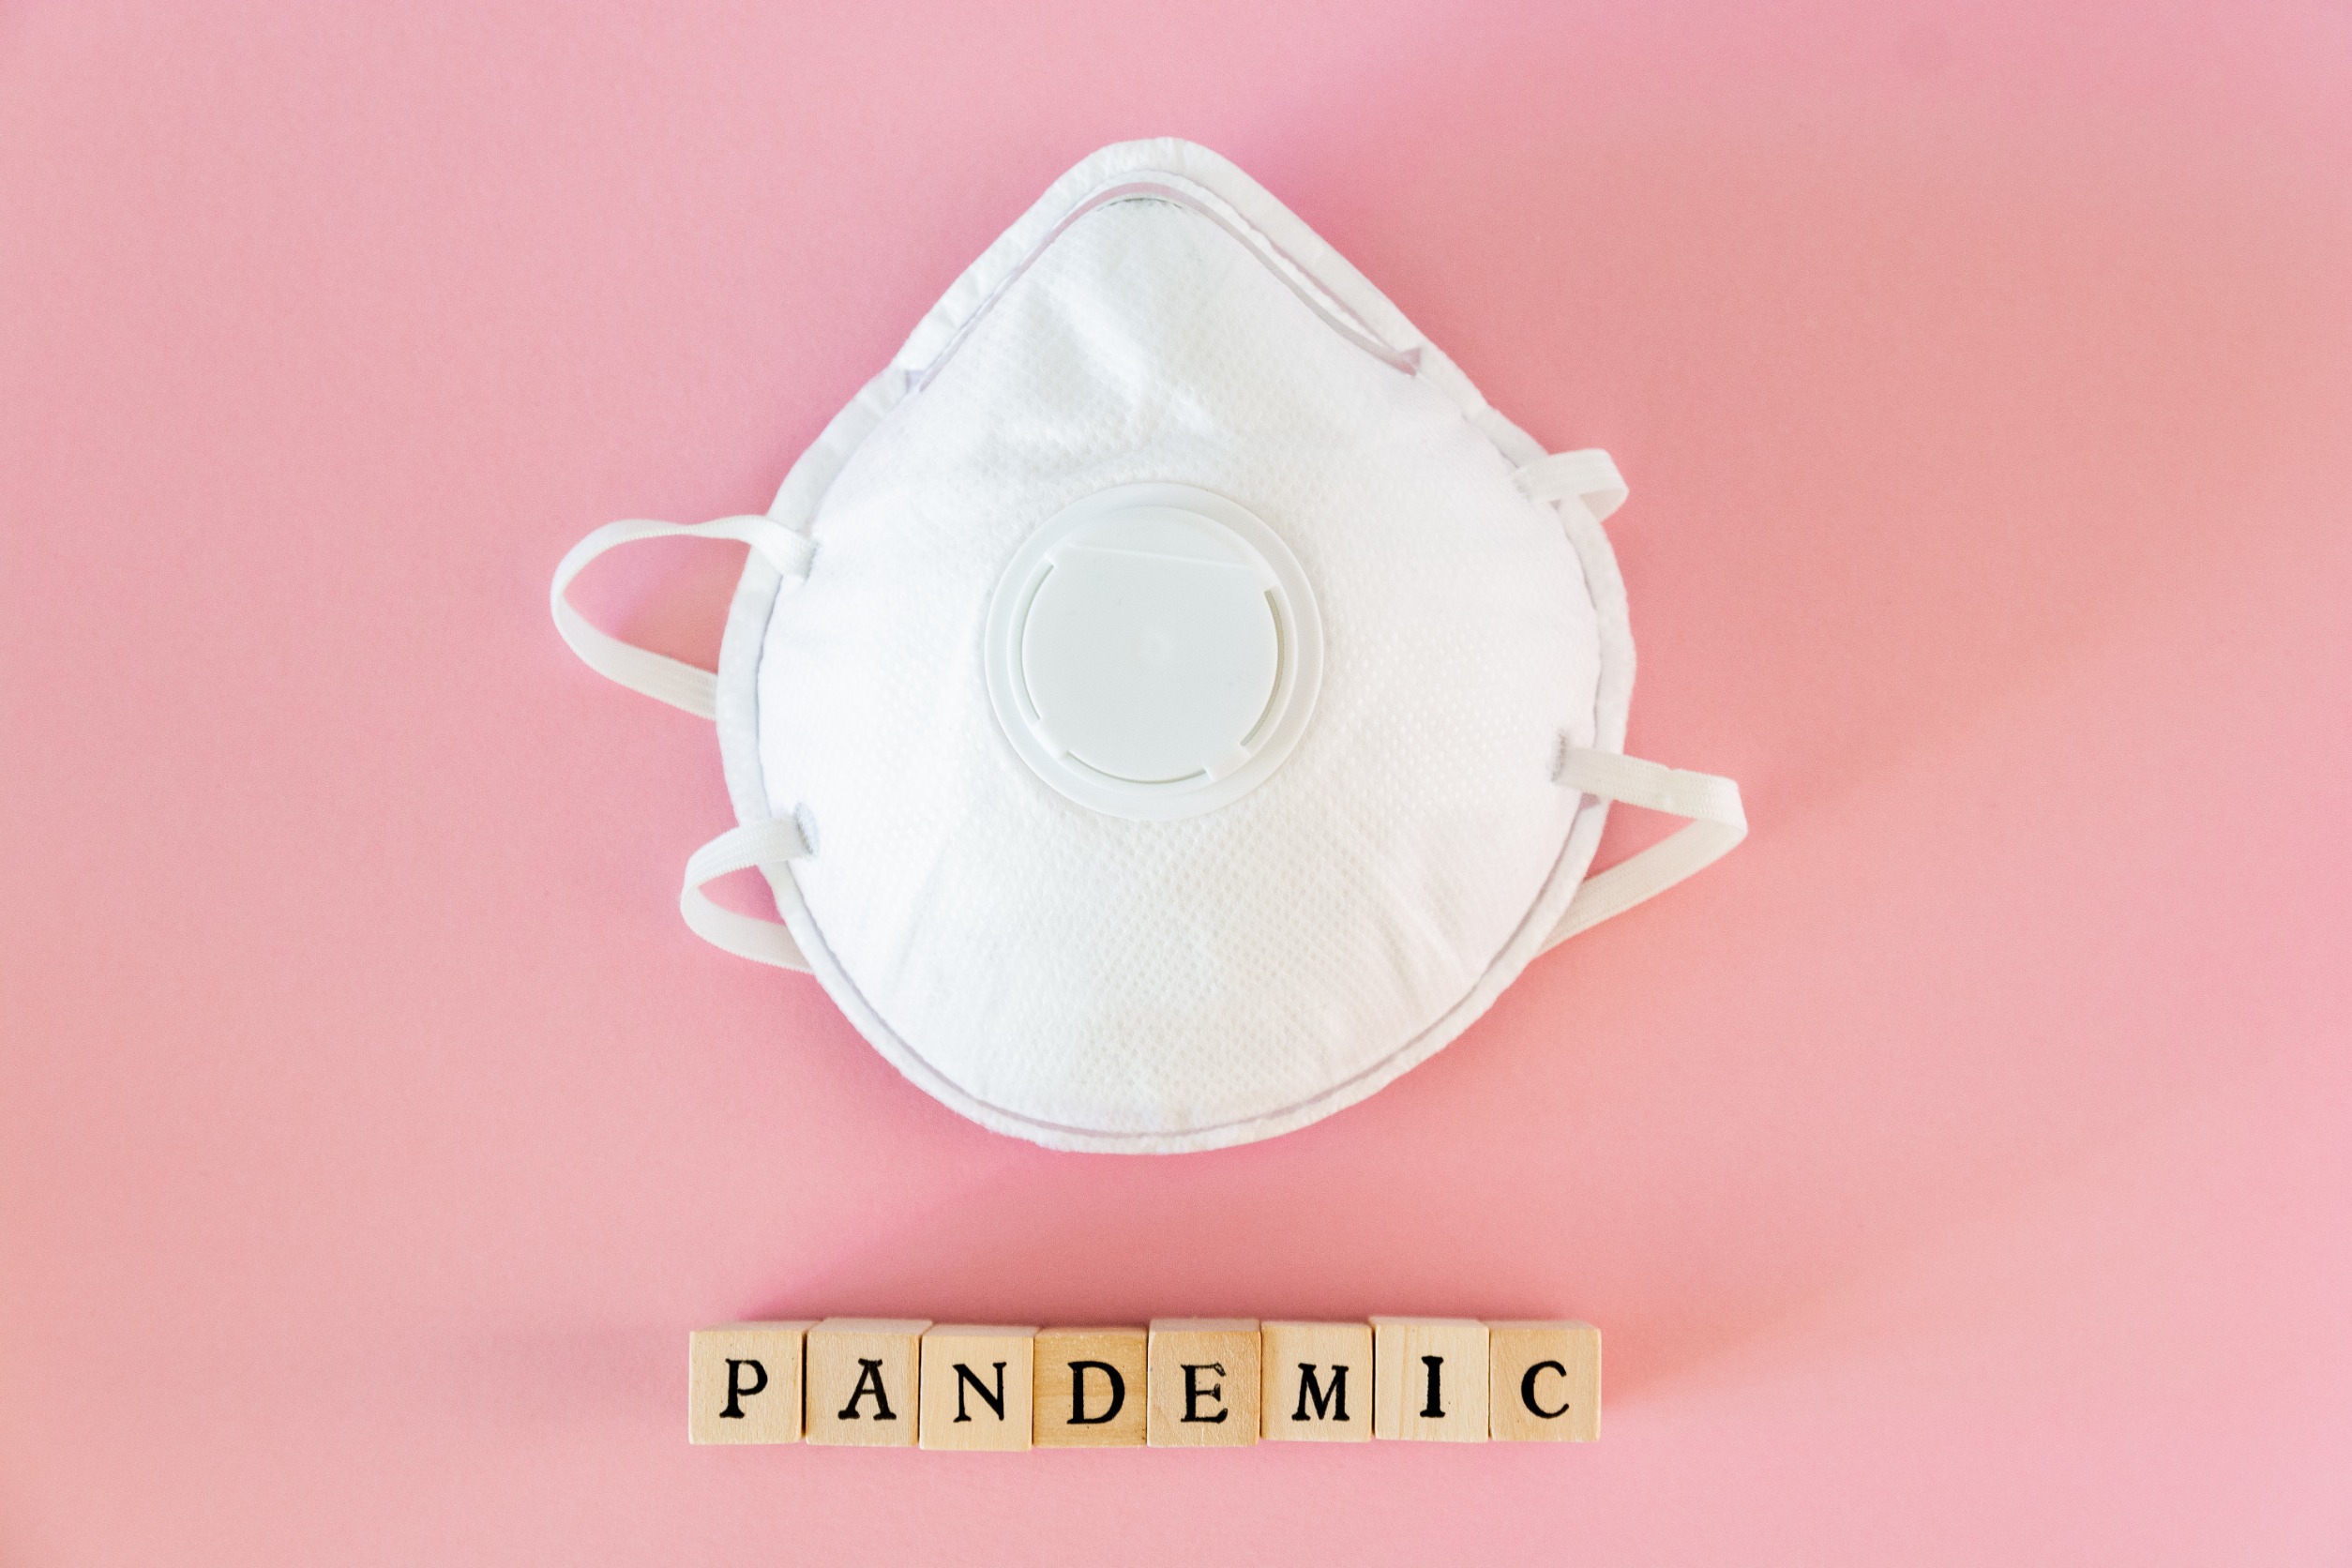 mask with the word pandemic under it